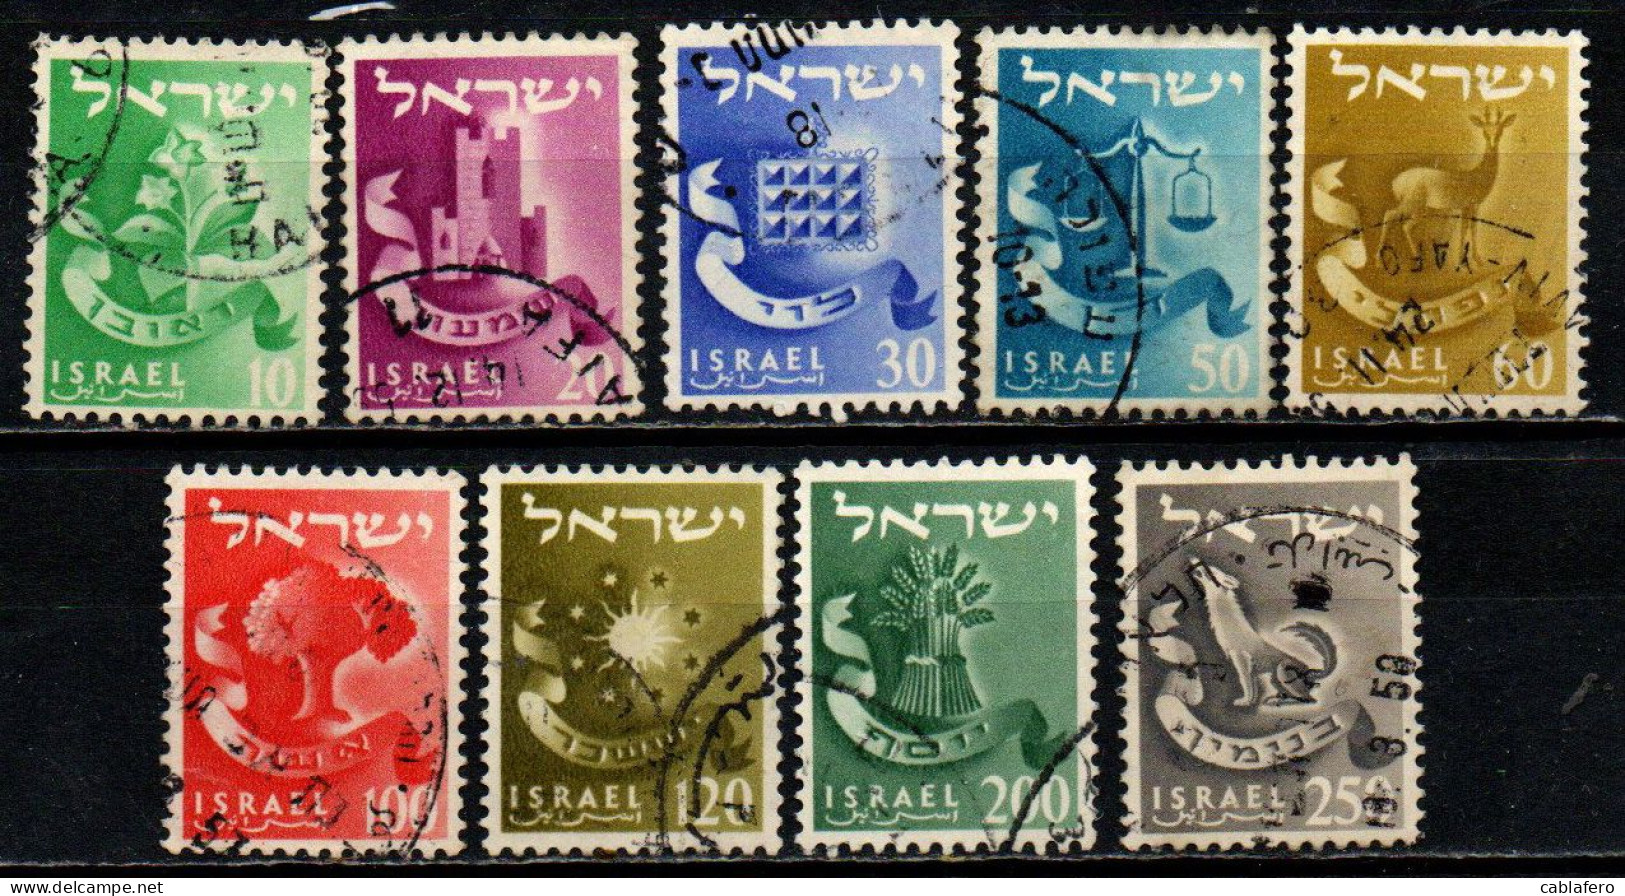 ISRAELE - 1955 - Twelve Tribes - USATI - Used Stamps (without Tabs)